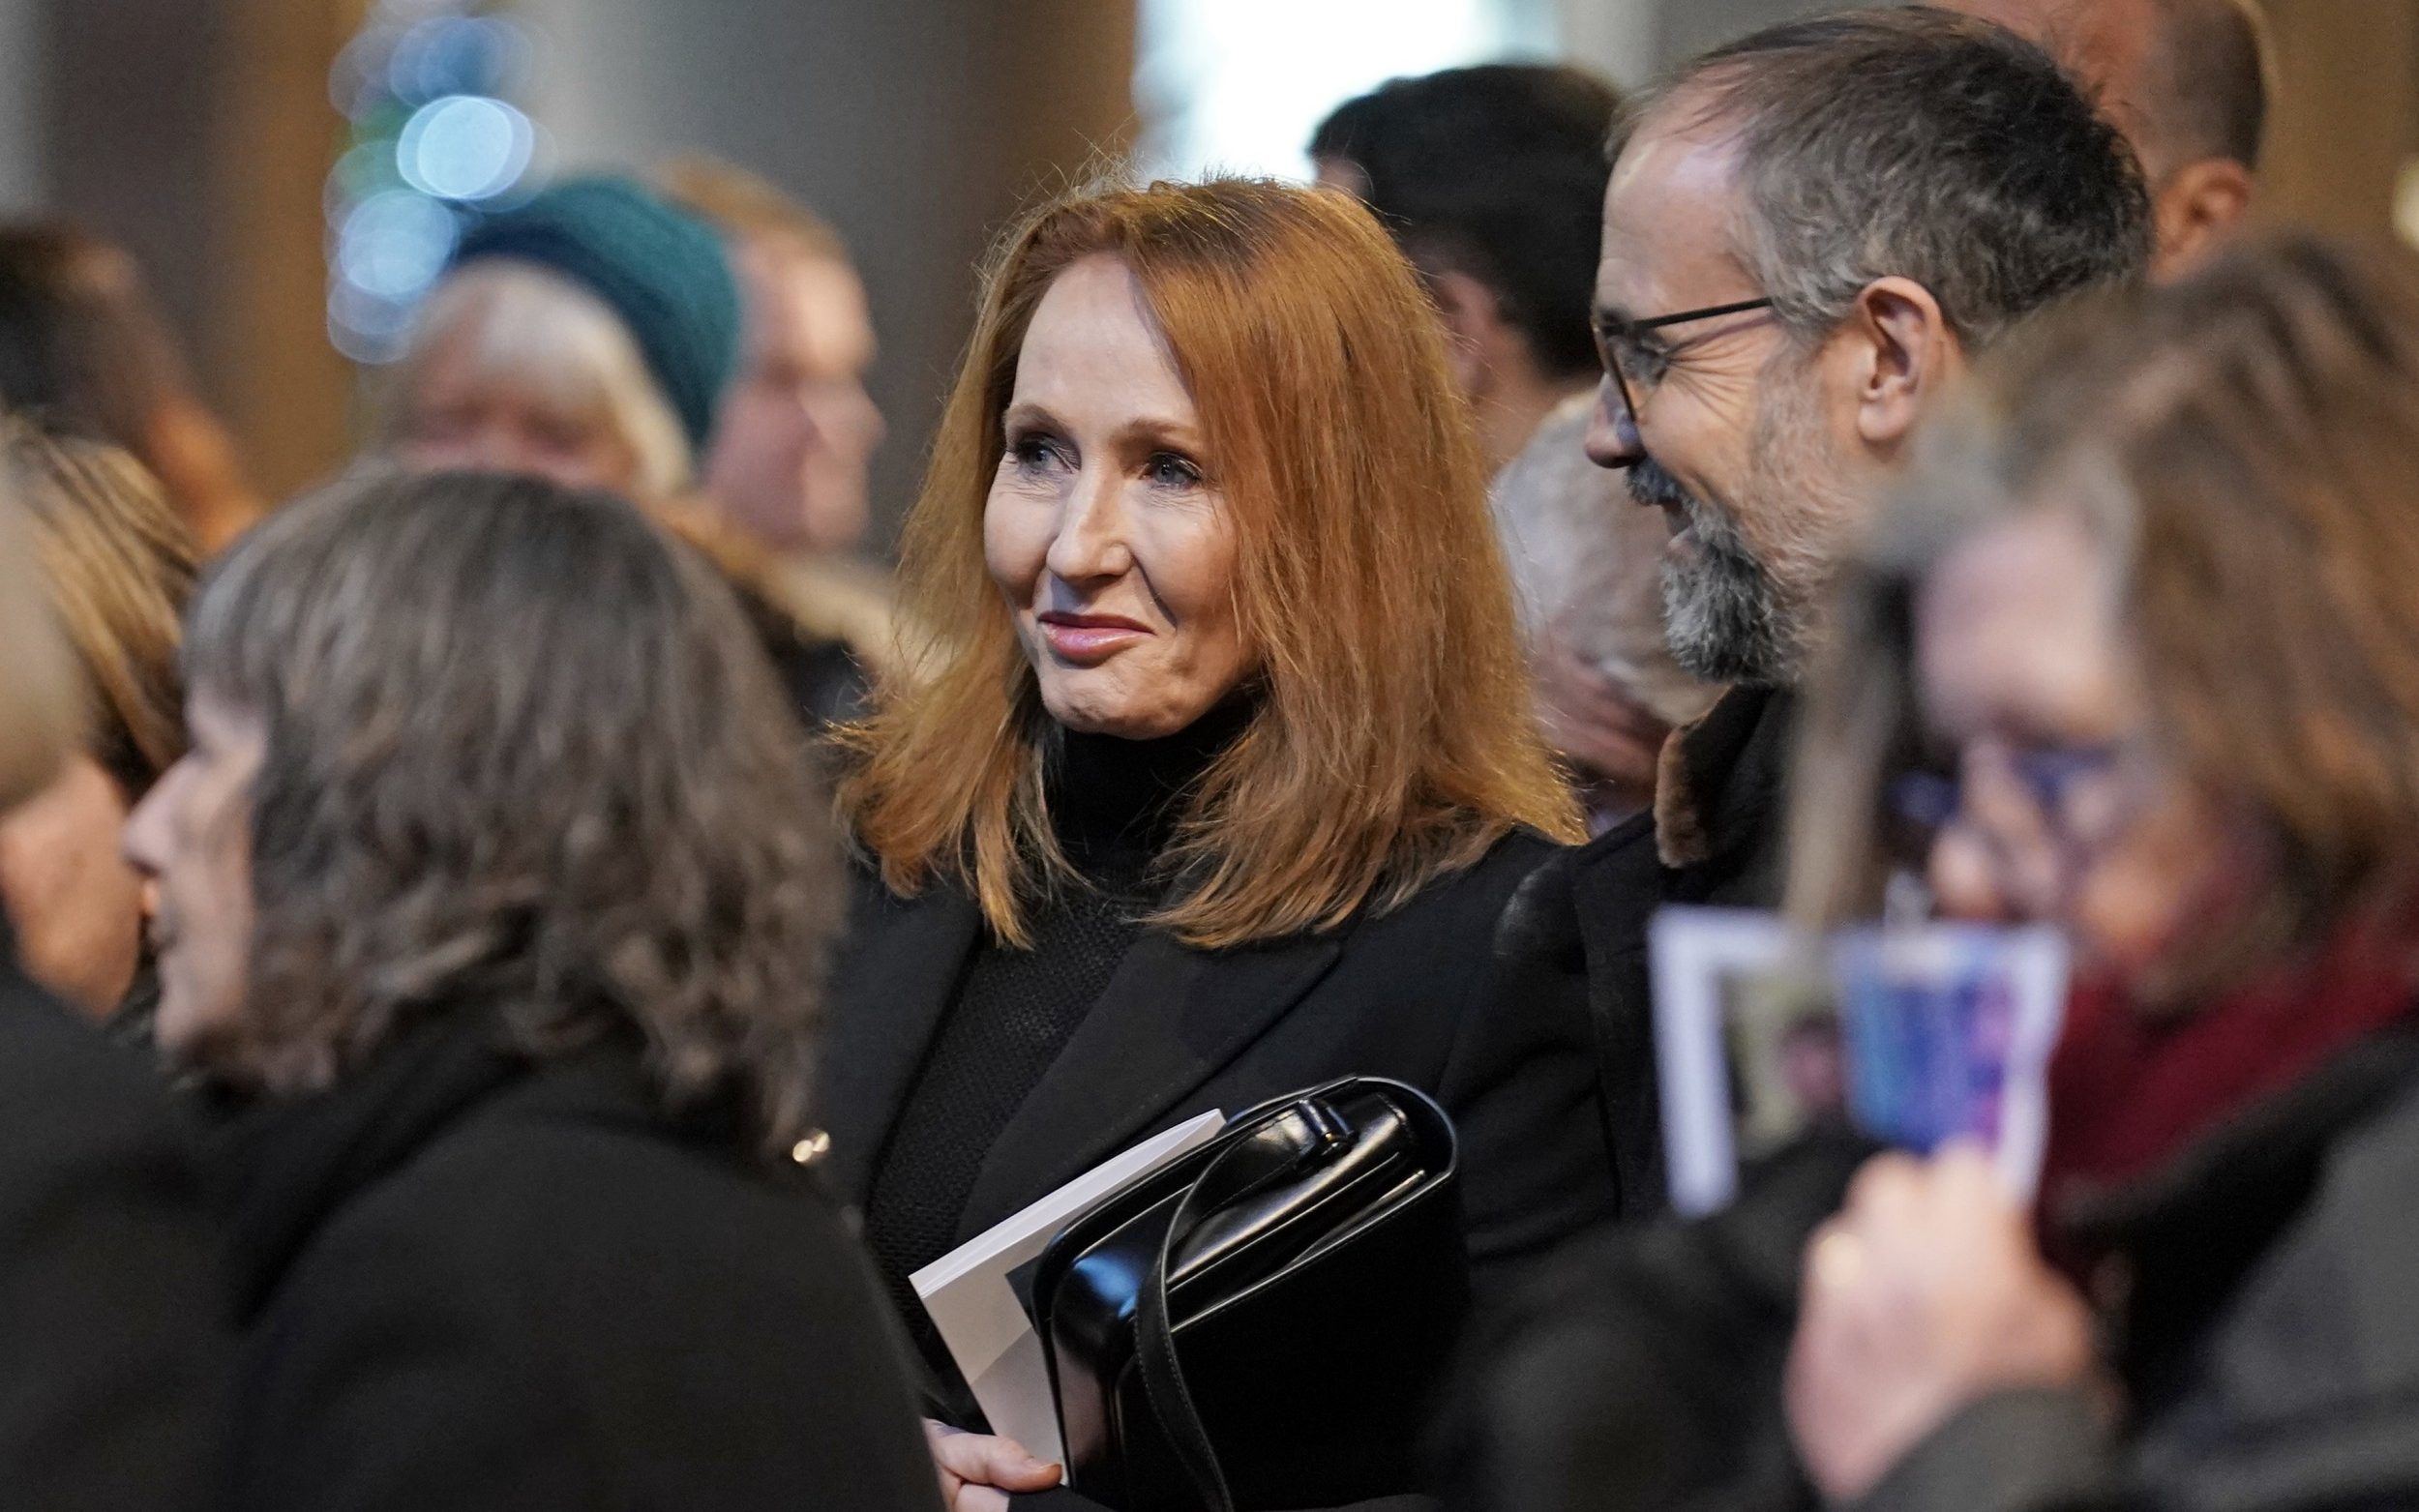 jk rowling has exposed scotland’s chilling descent into dystopia